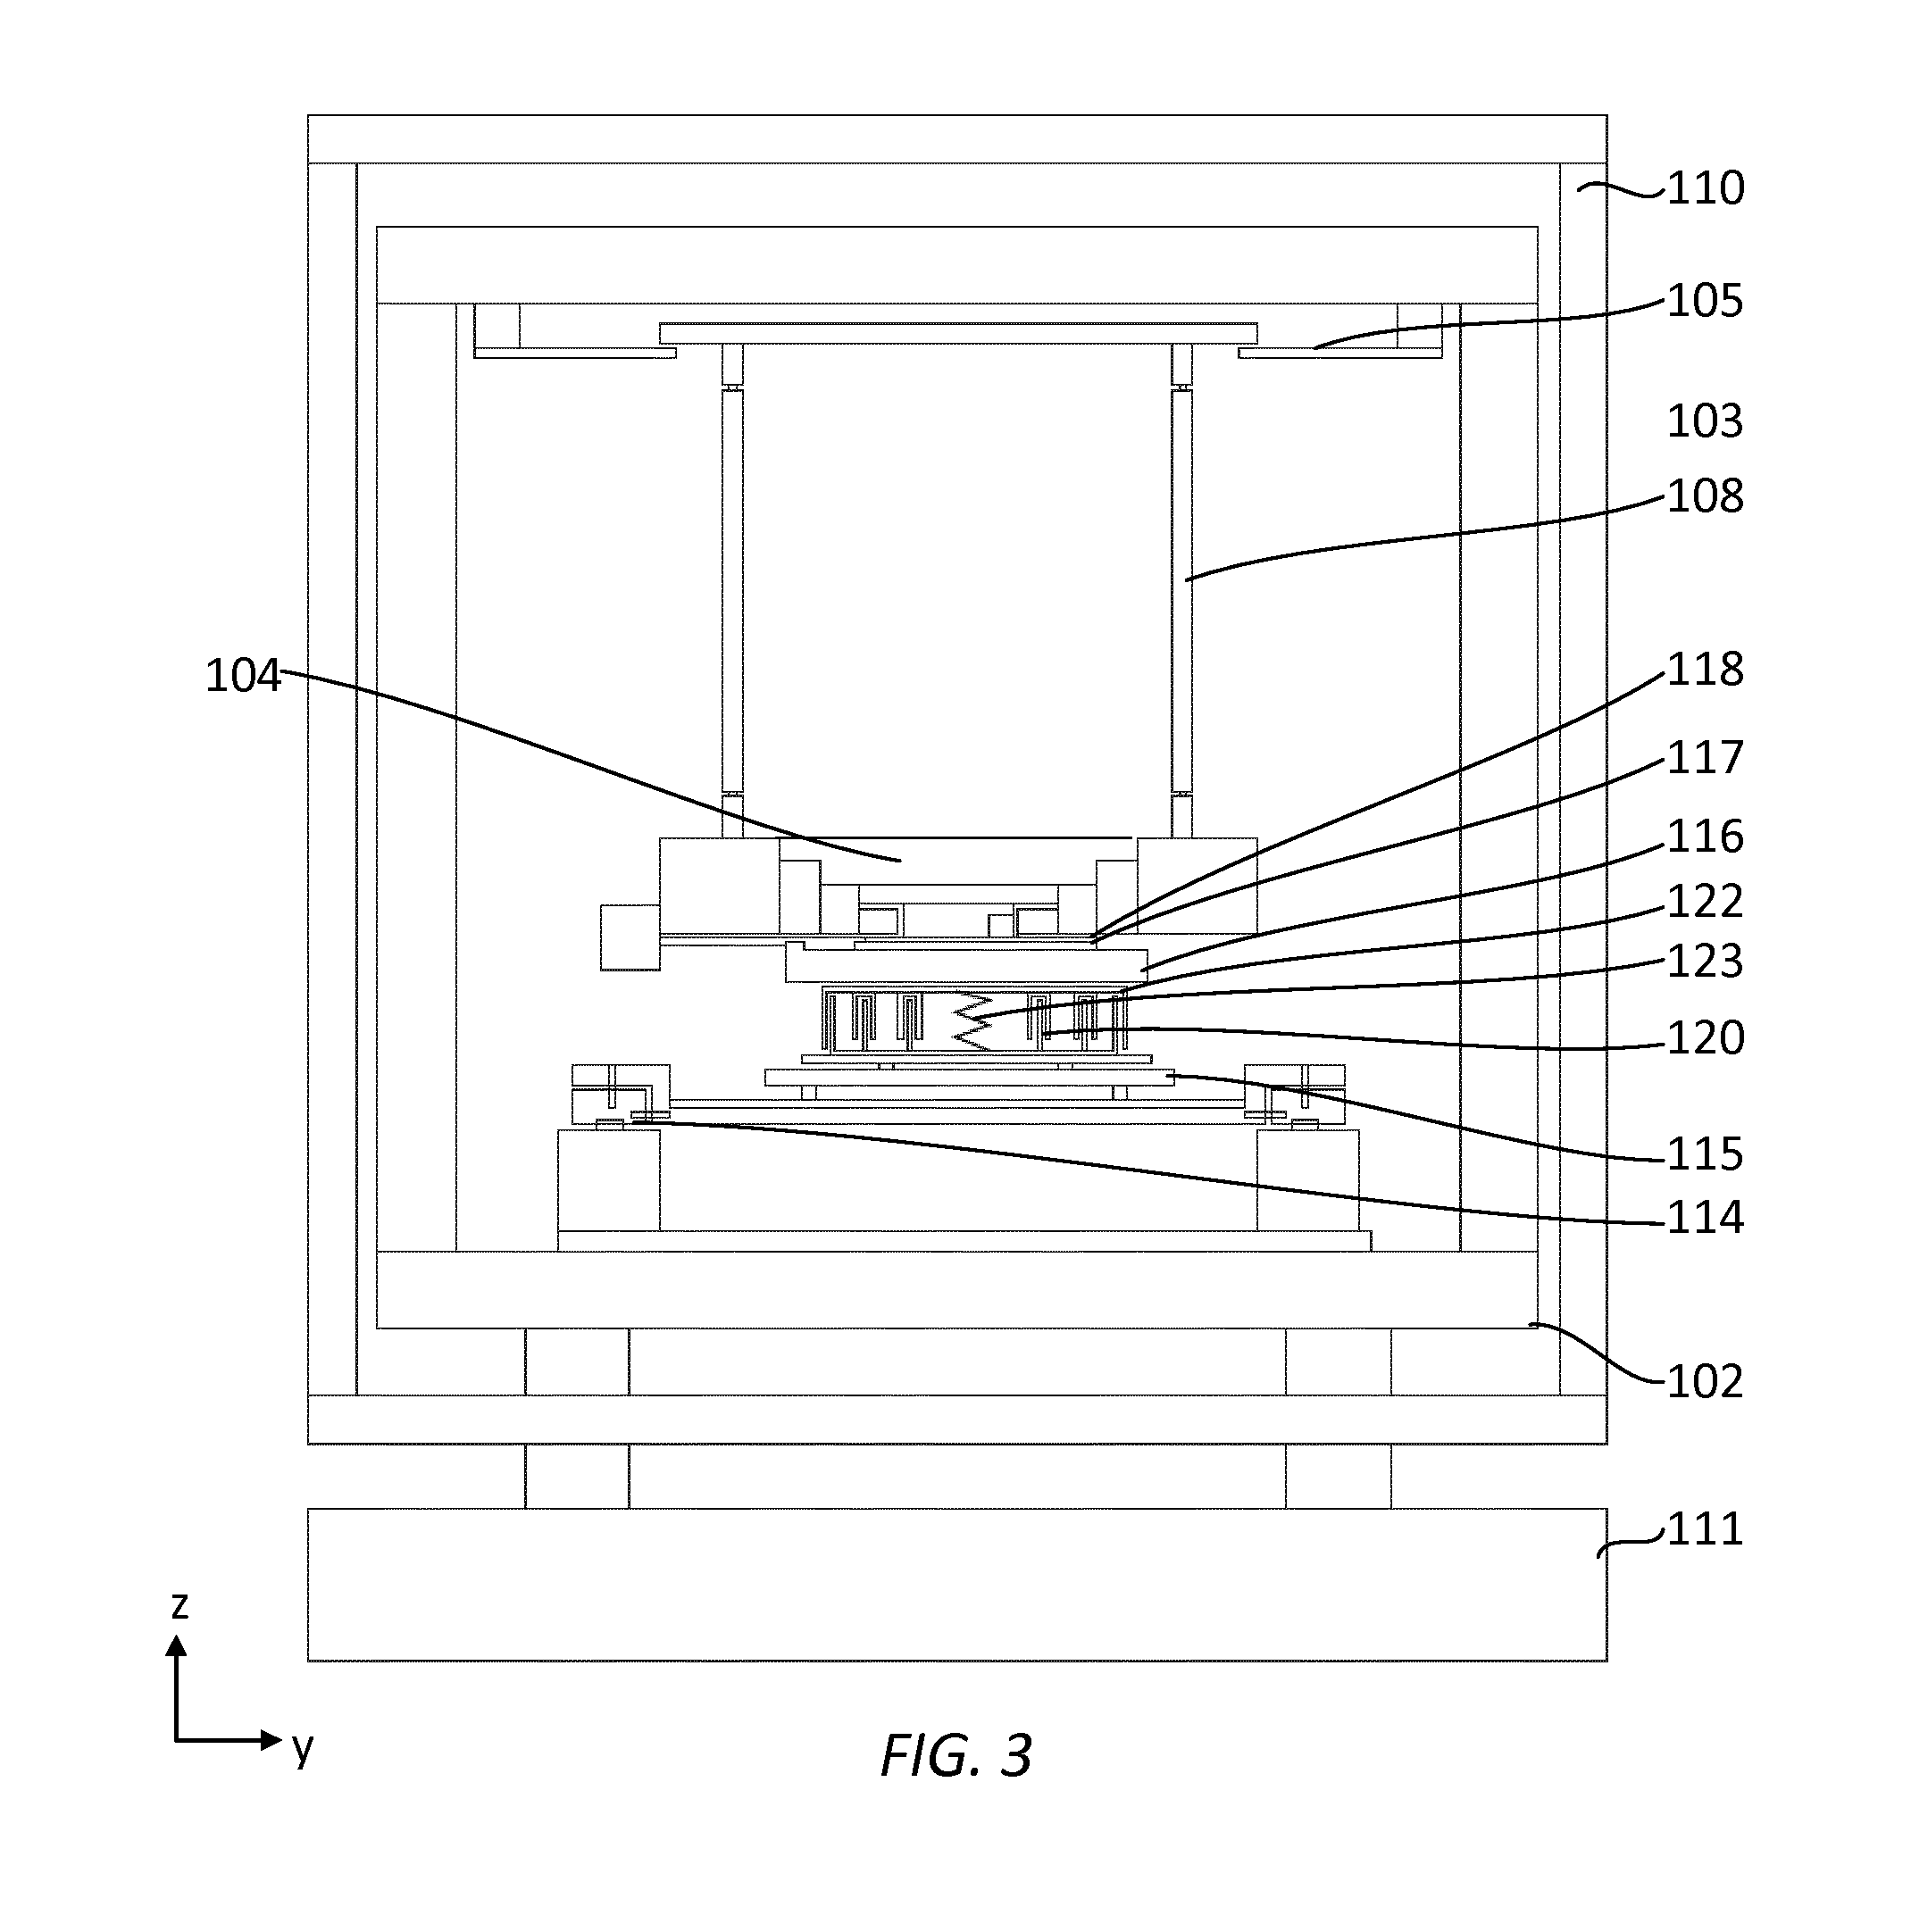 Vibration isolation module and substrate processing system